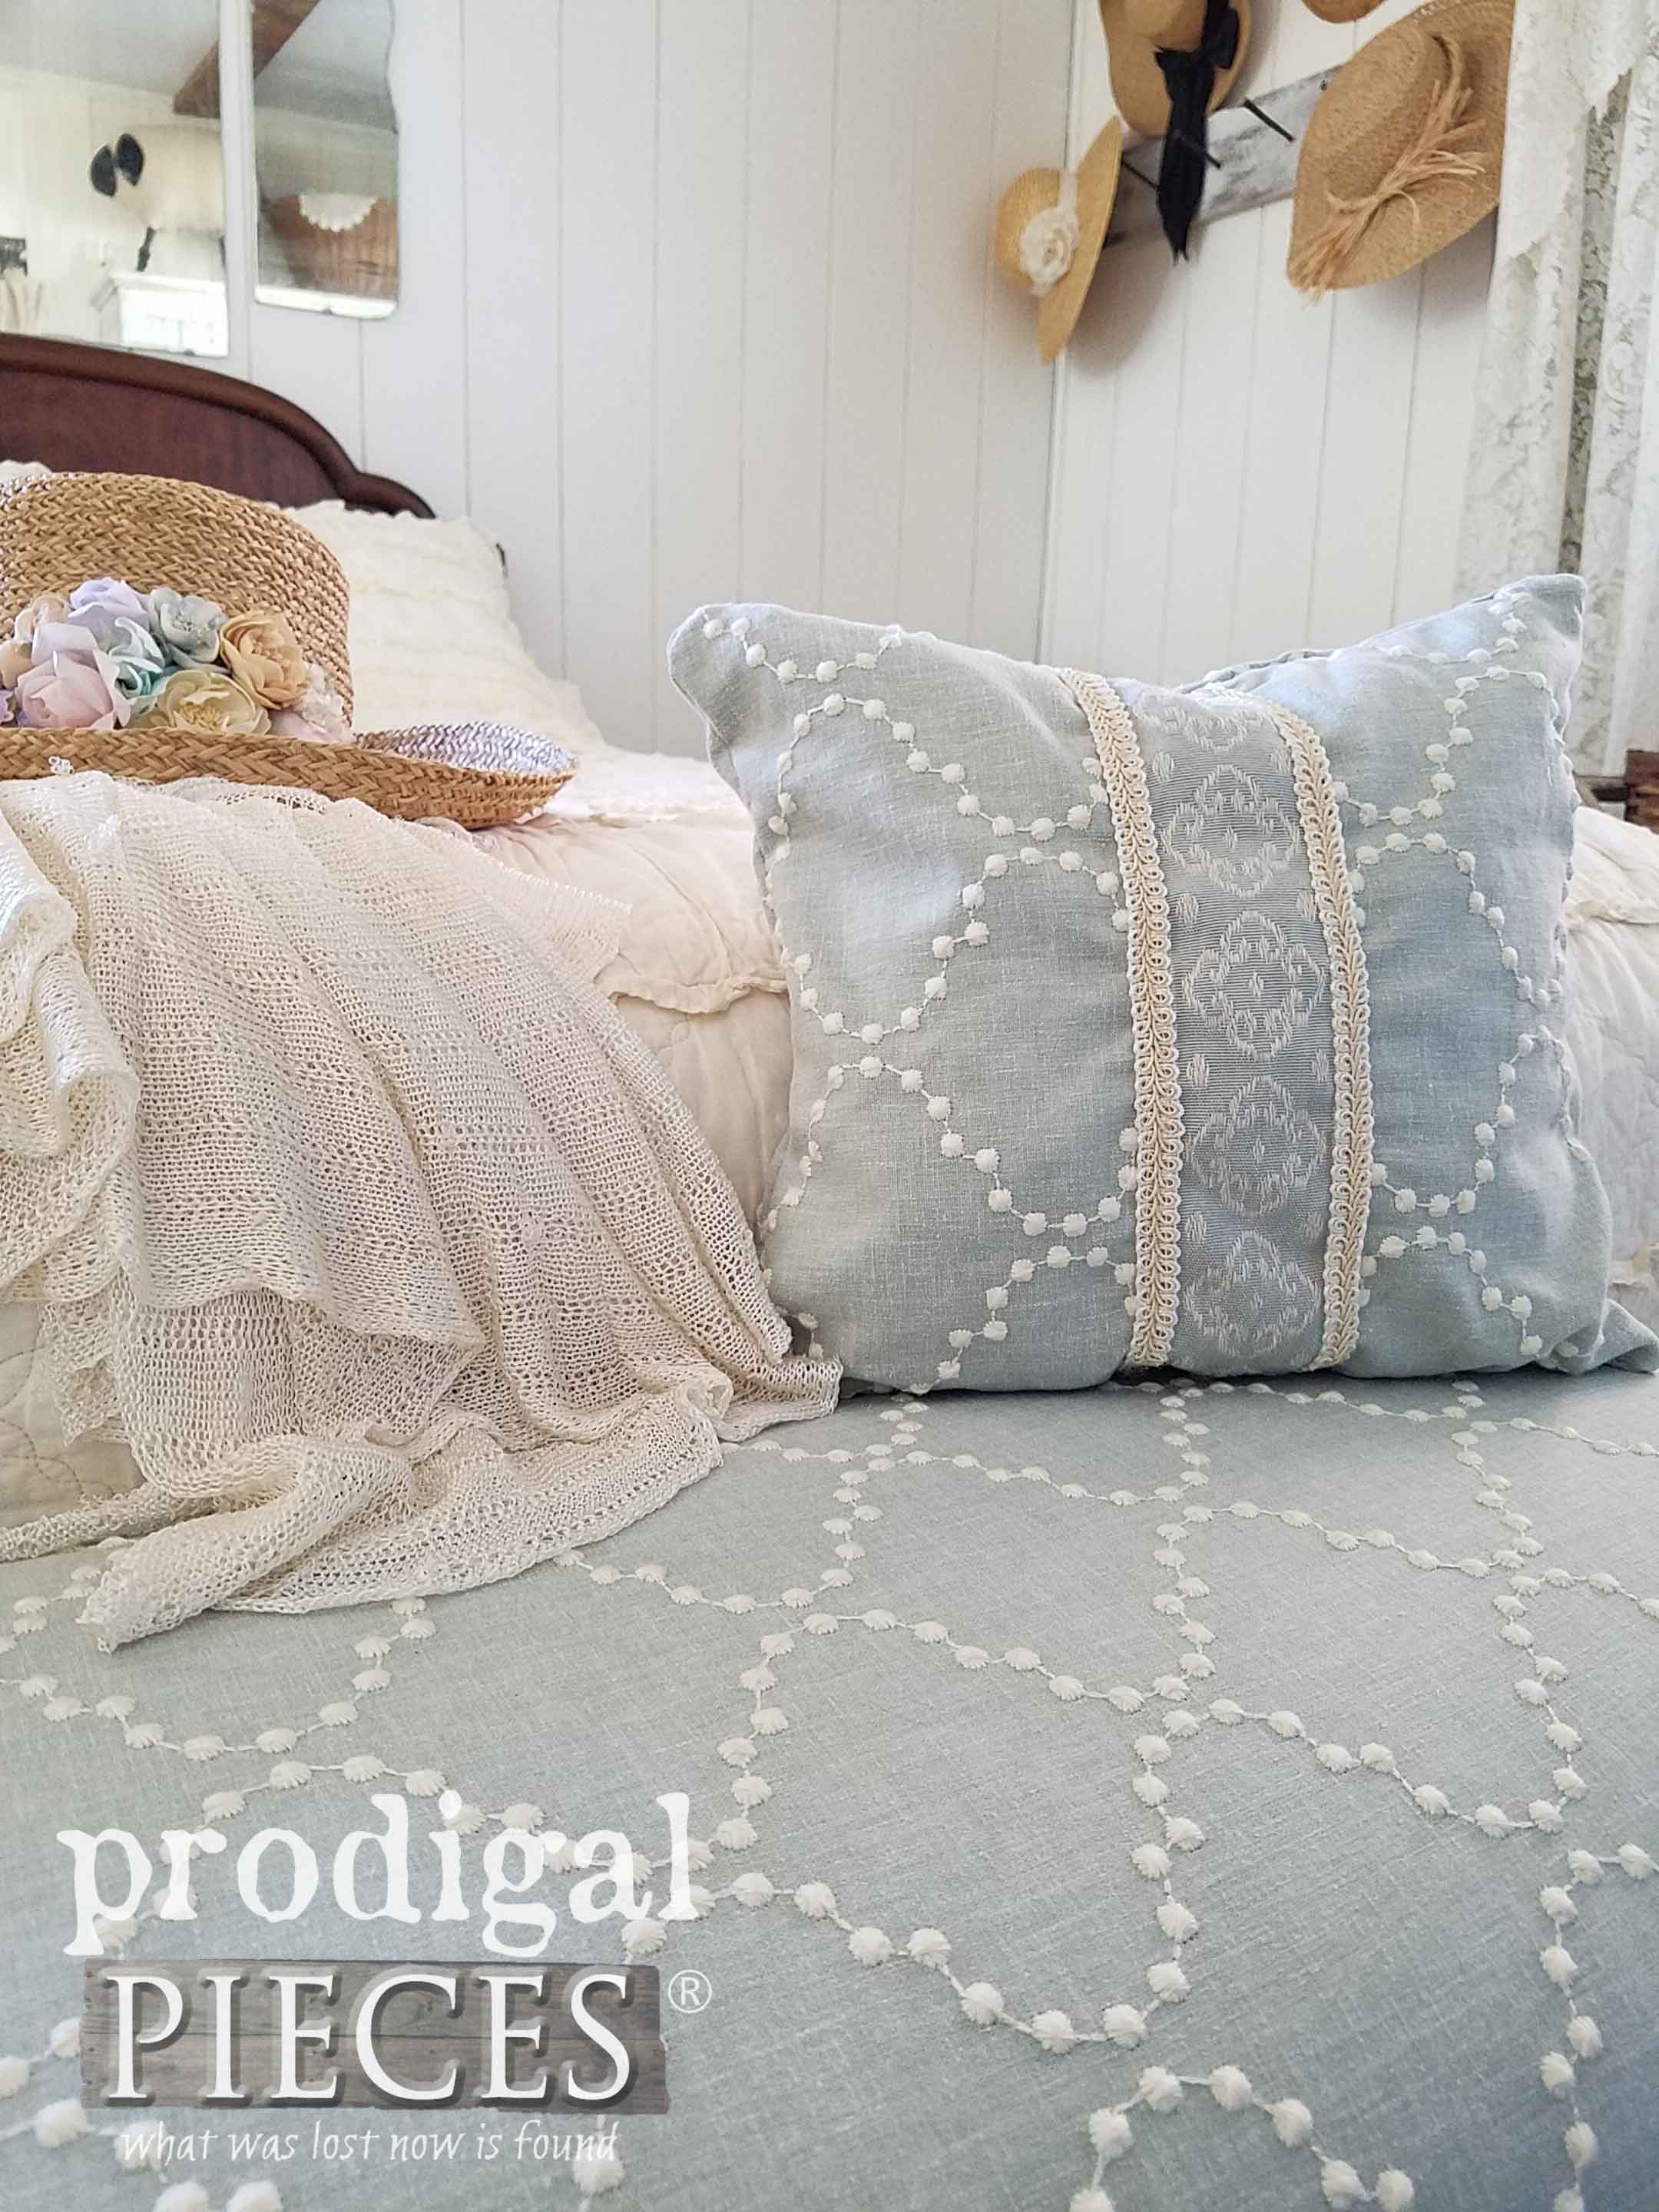 Vintage Upholstered Bench and Pillow Set by Larissa of Prodigal Pieces | prodigalpieces.com